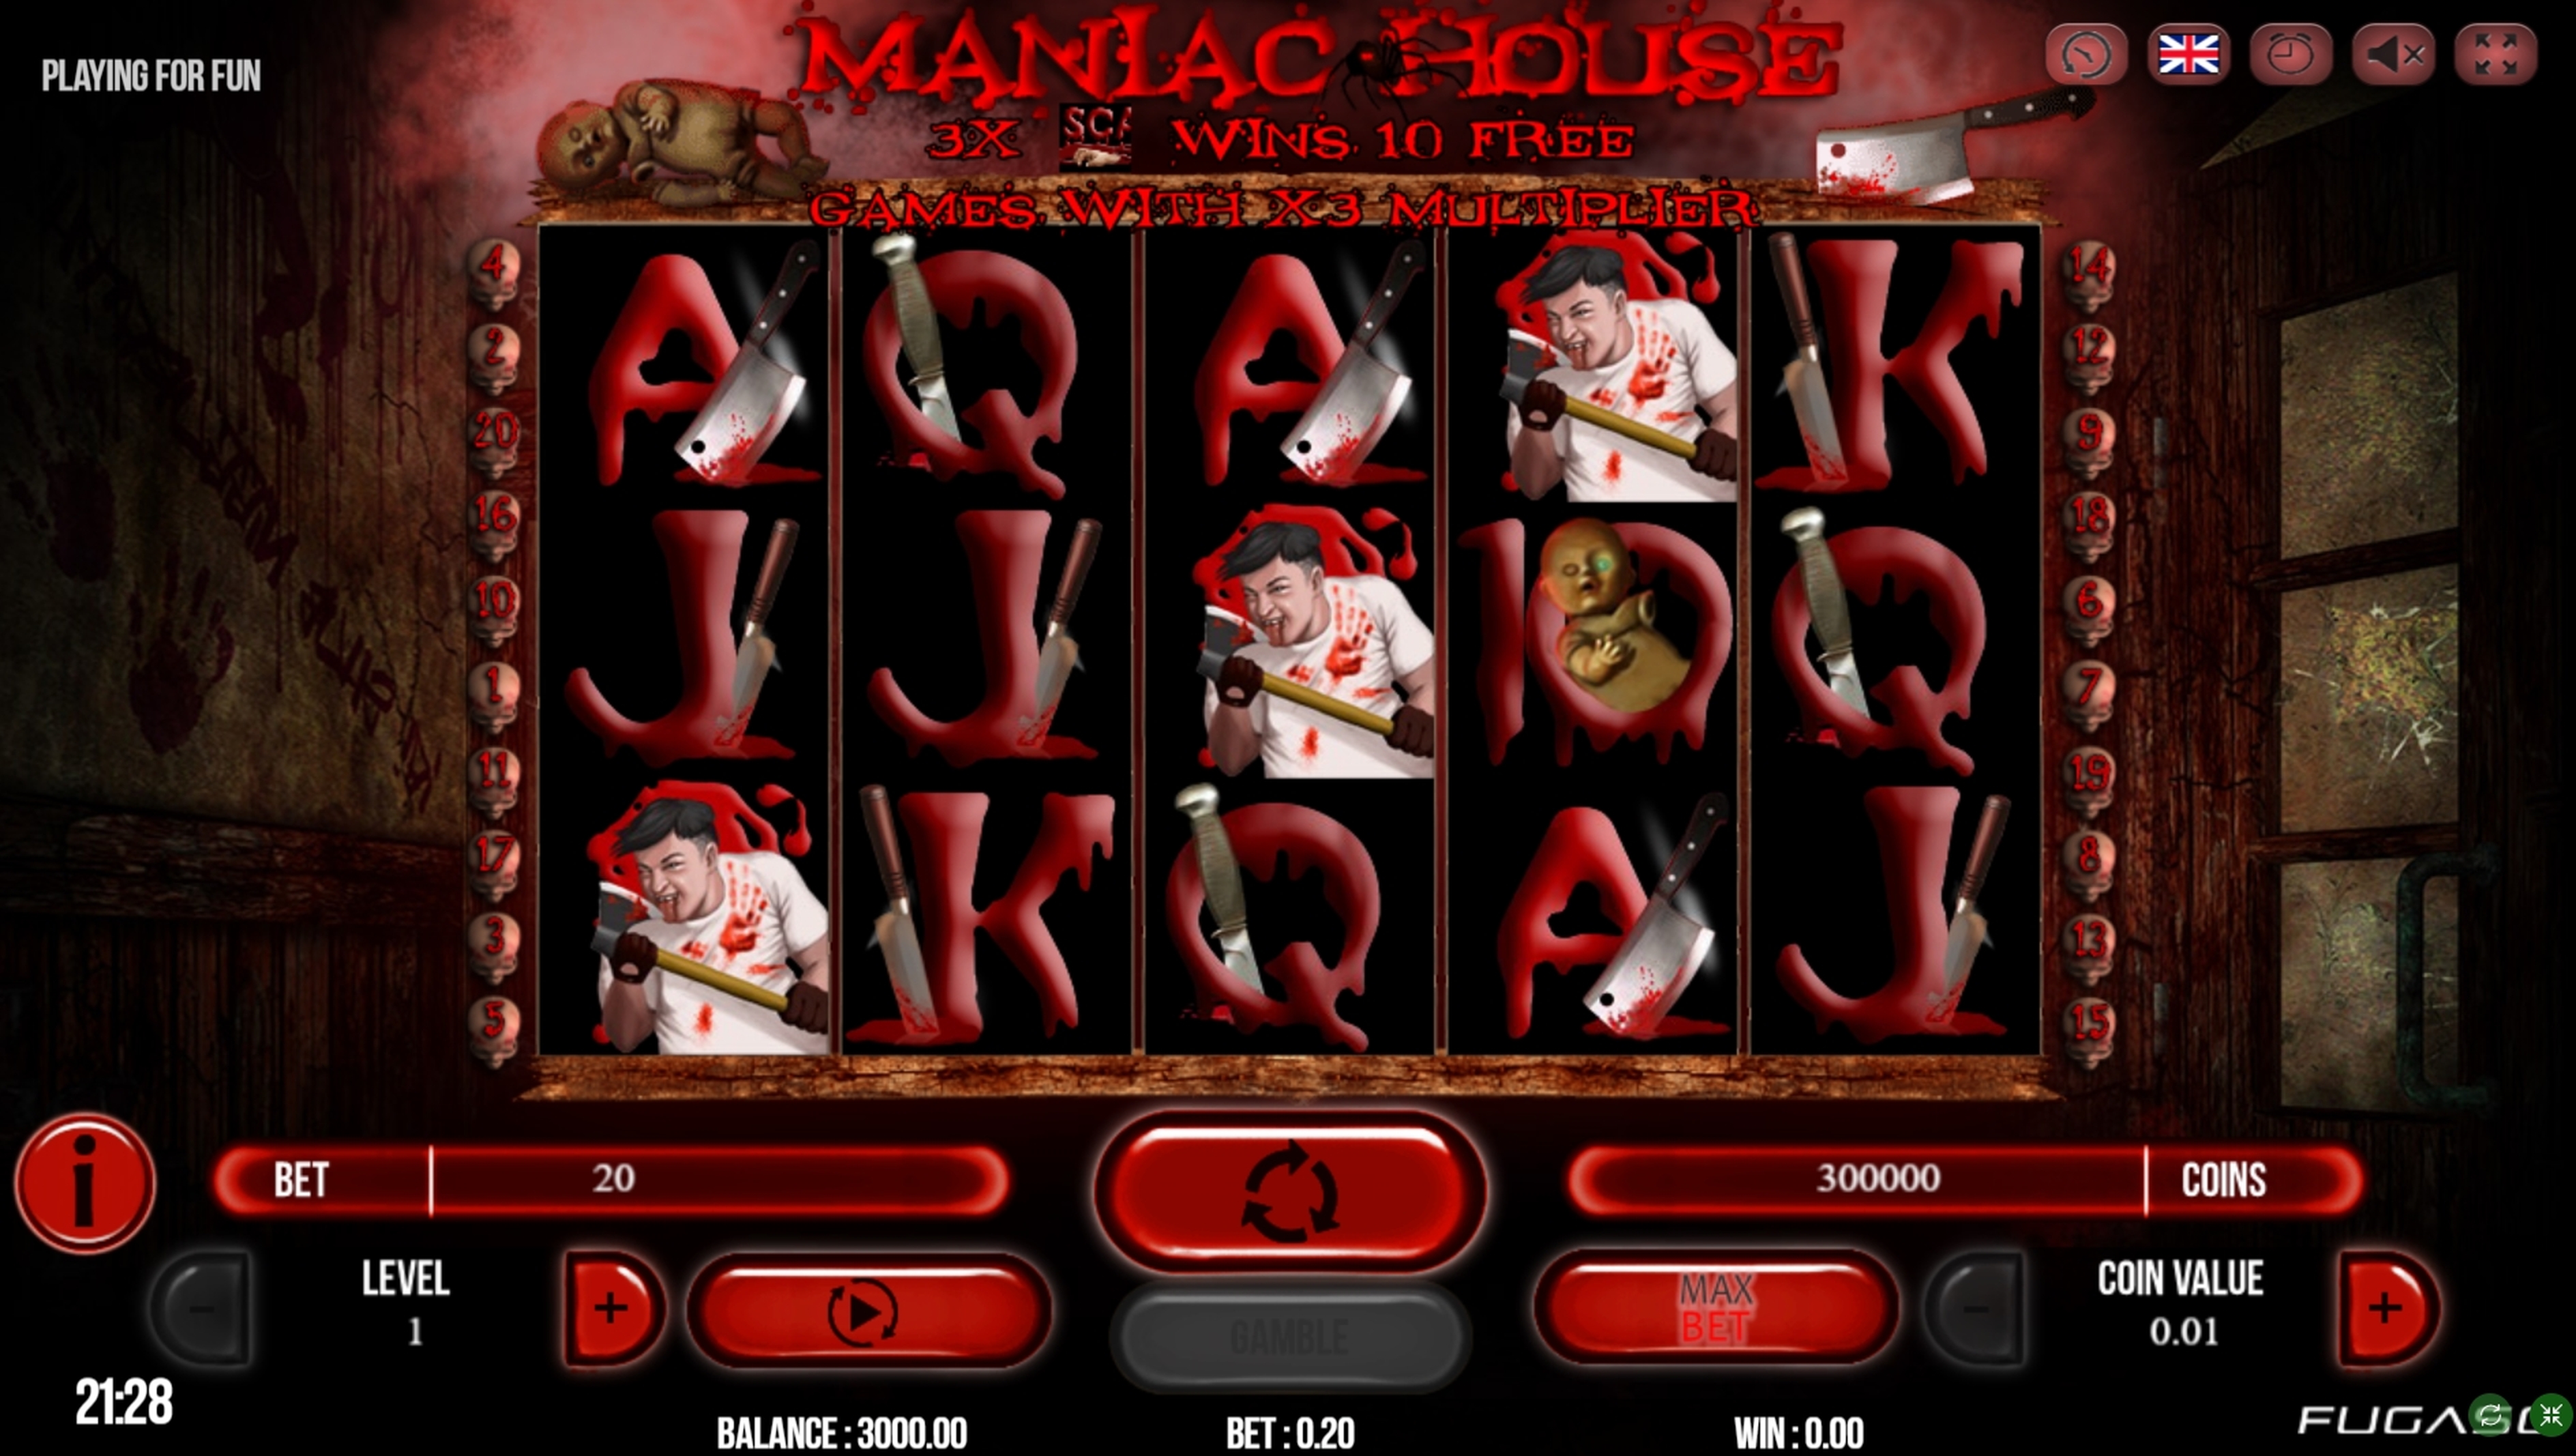 Reels in Maniac House Slot Game by Fugaso